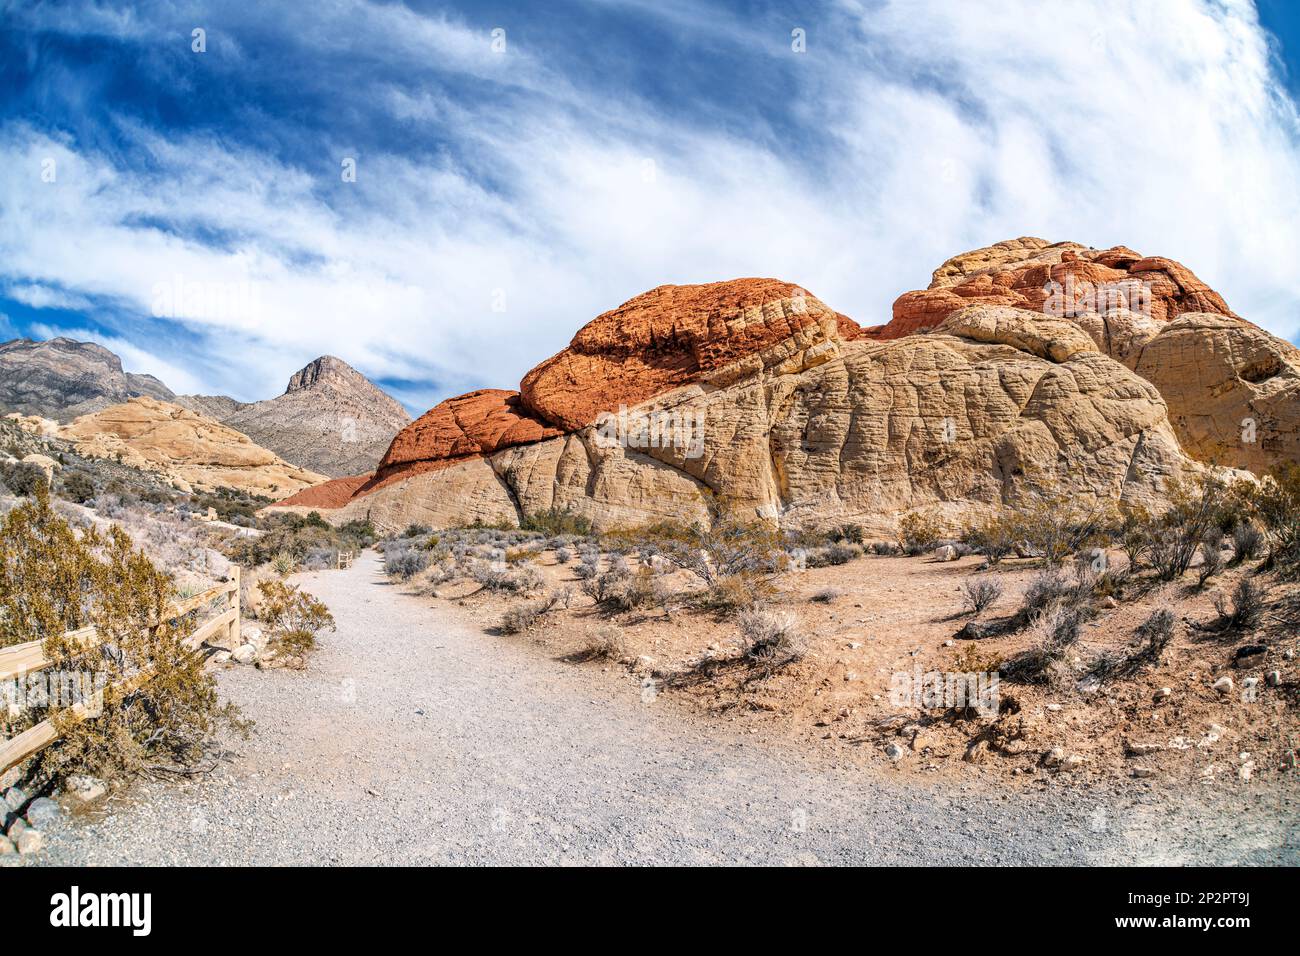 Hiking trail leading into the deep heart of Red Rock Canyon in Las Vegas shows a vibrant day to be active and enjoy leisure time. Stock Photo